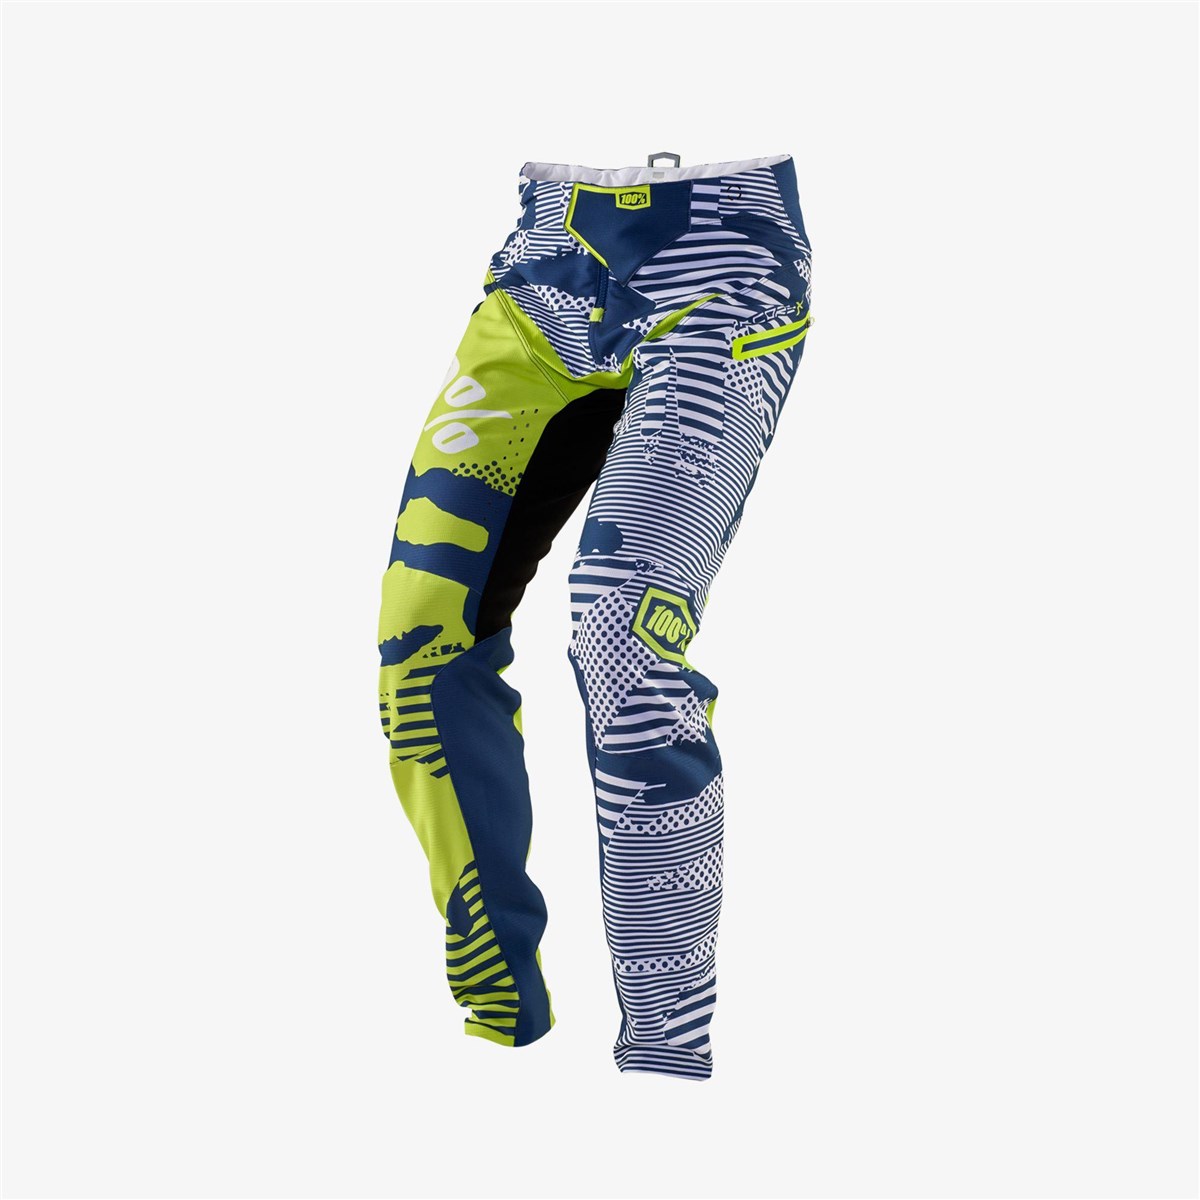 100% R-Core X DH Pant product image